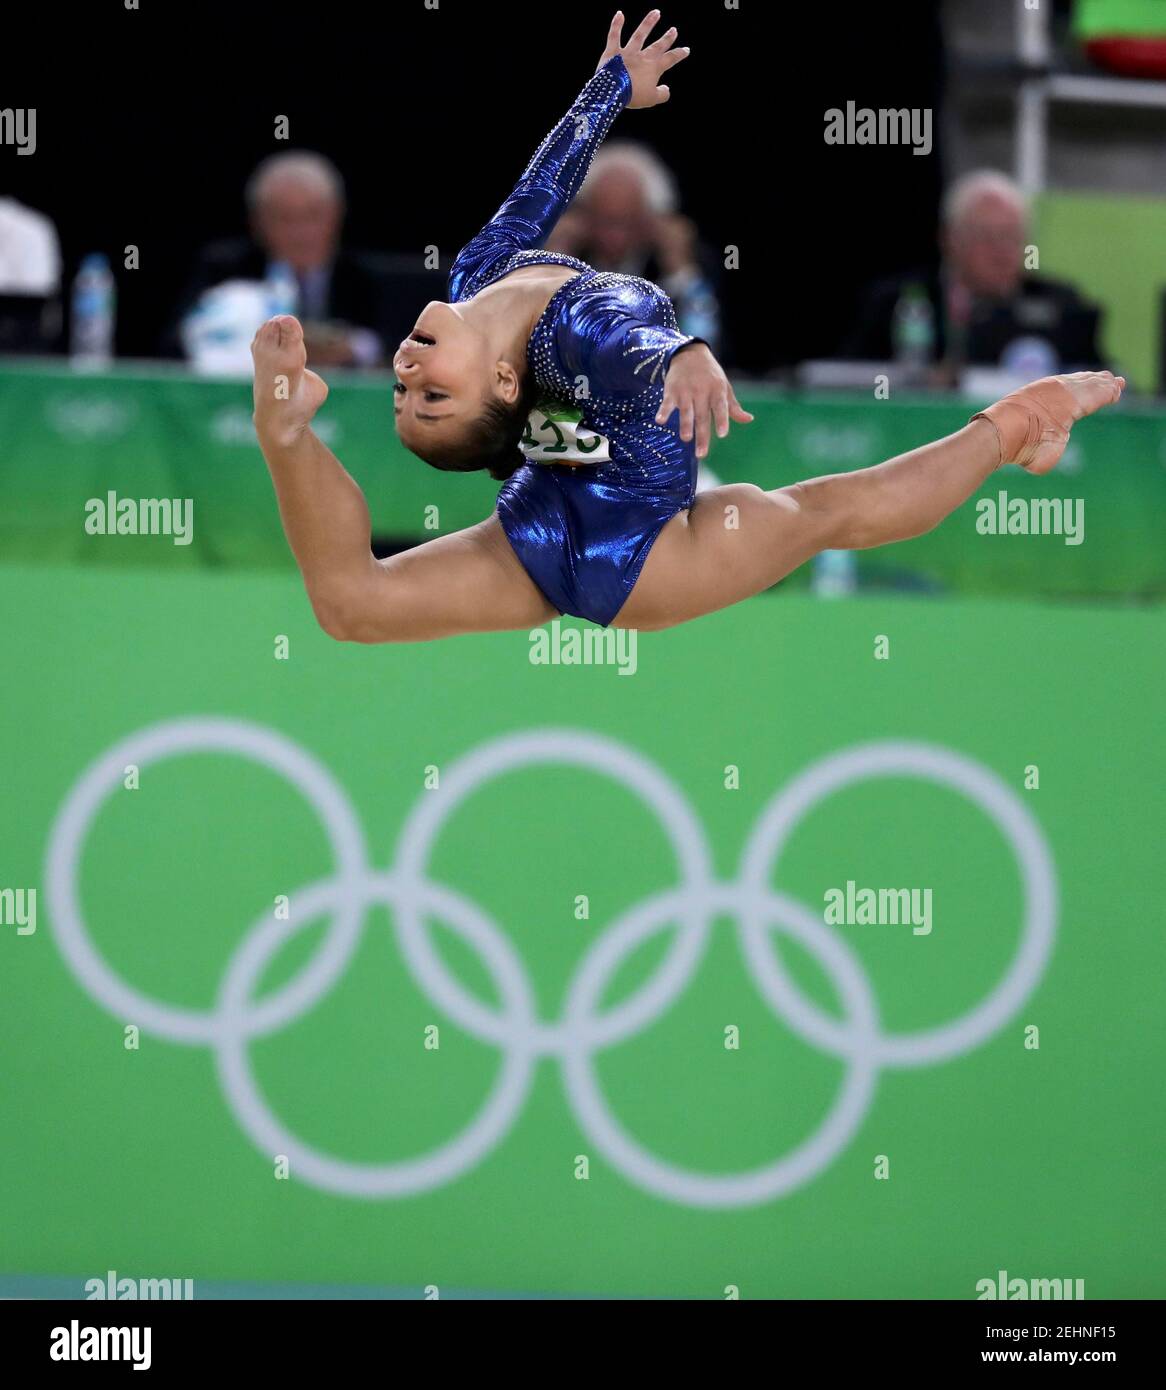 2016 Rio Olympics - Artistic Gymnastics - Final - Women's Team Final - Rio Olympic Arena - Rio de Janeiro, Brazil - 09/08/2016.   Flavia Saraiva (BRA) of Brazil competes on the floor exercise. REUTERS/Damir Sagolj  FOR EDITORIAL USE ONLY. NOT FOR SALE FOR MARKETING OR ADVERTISING CAMPAIGNS.   Picture Supplied by Action Images Stock Photo